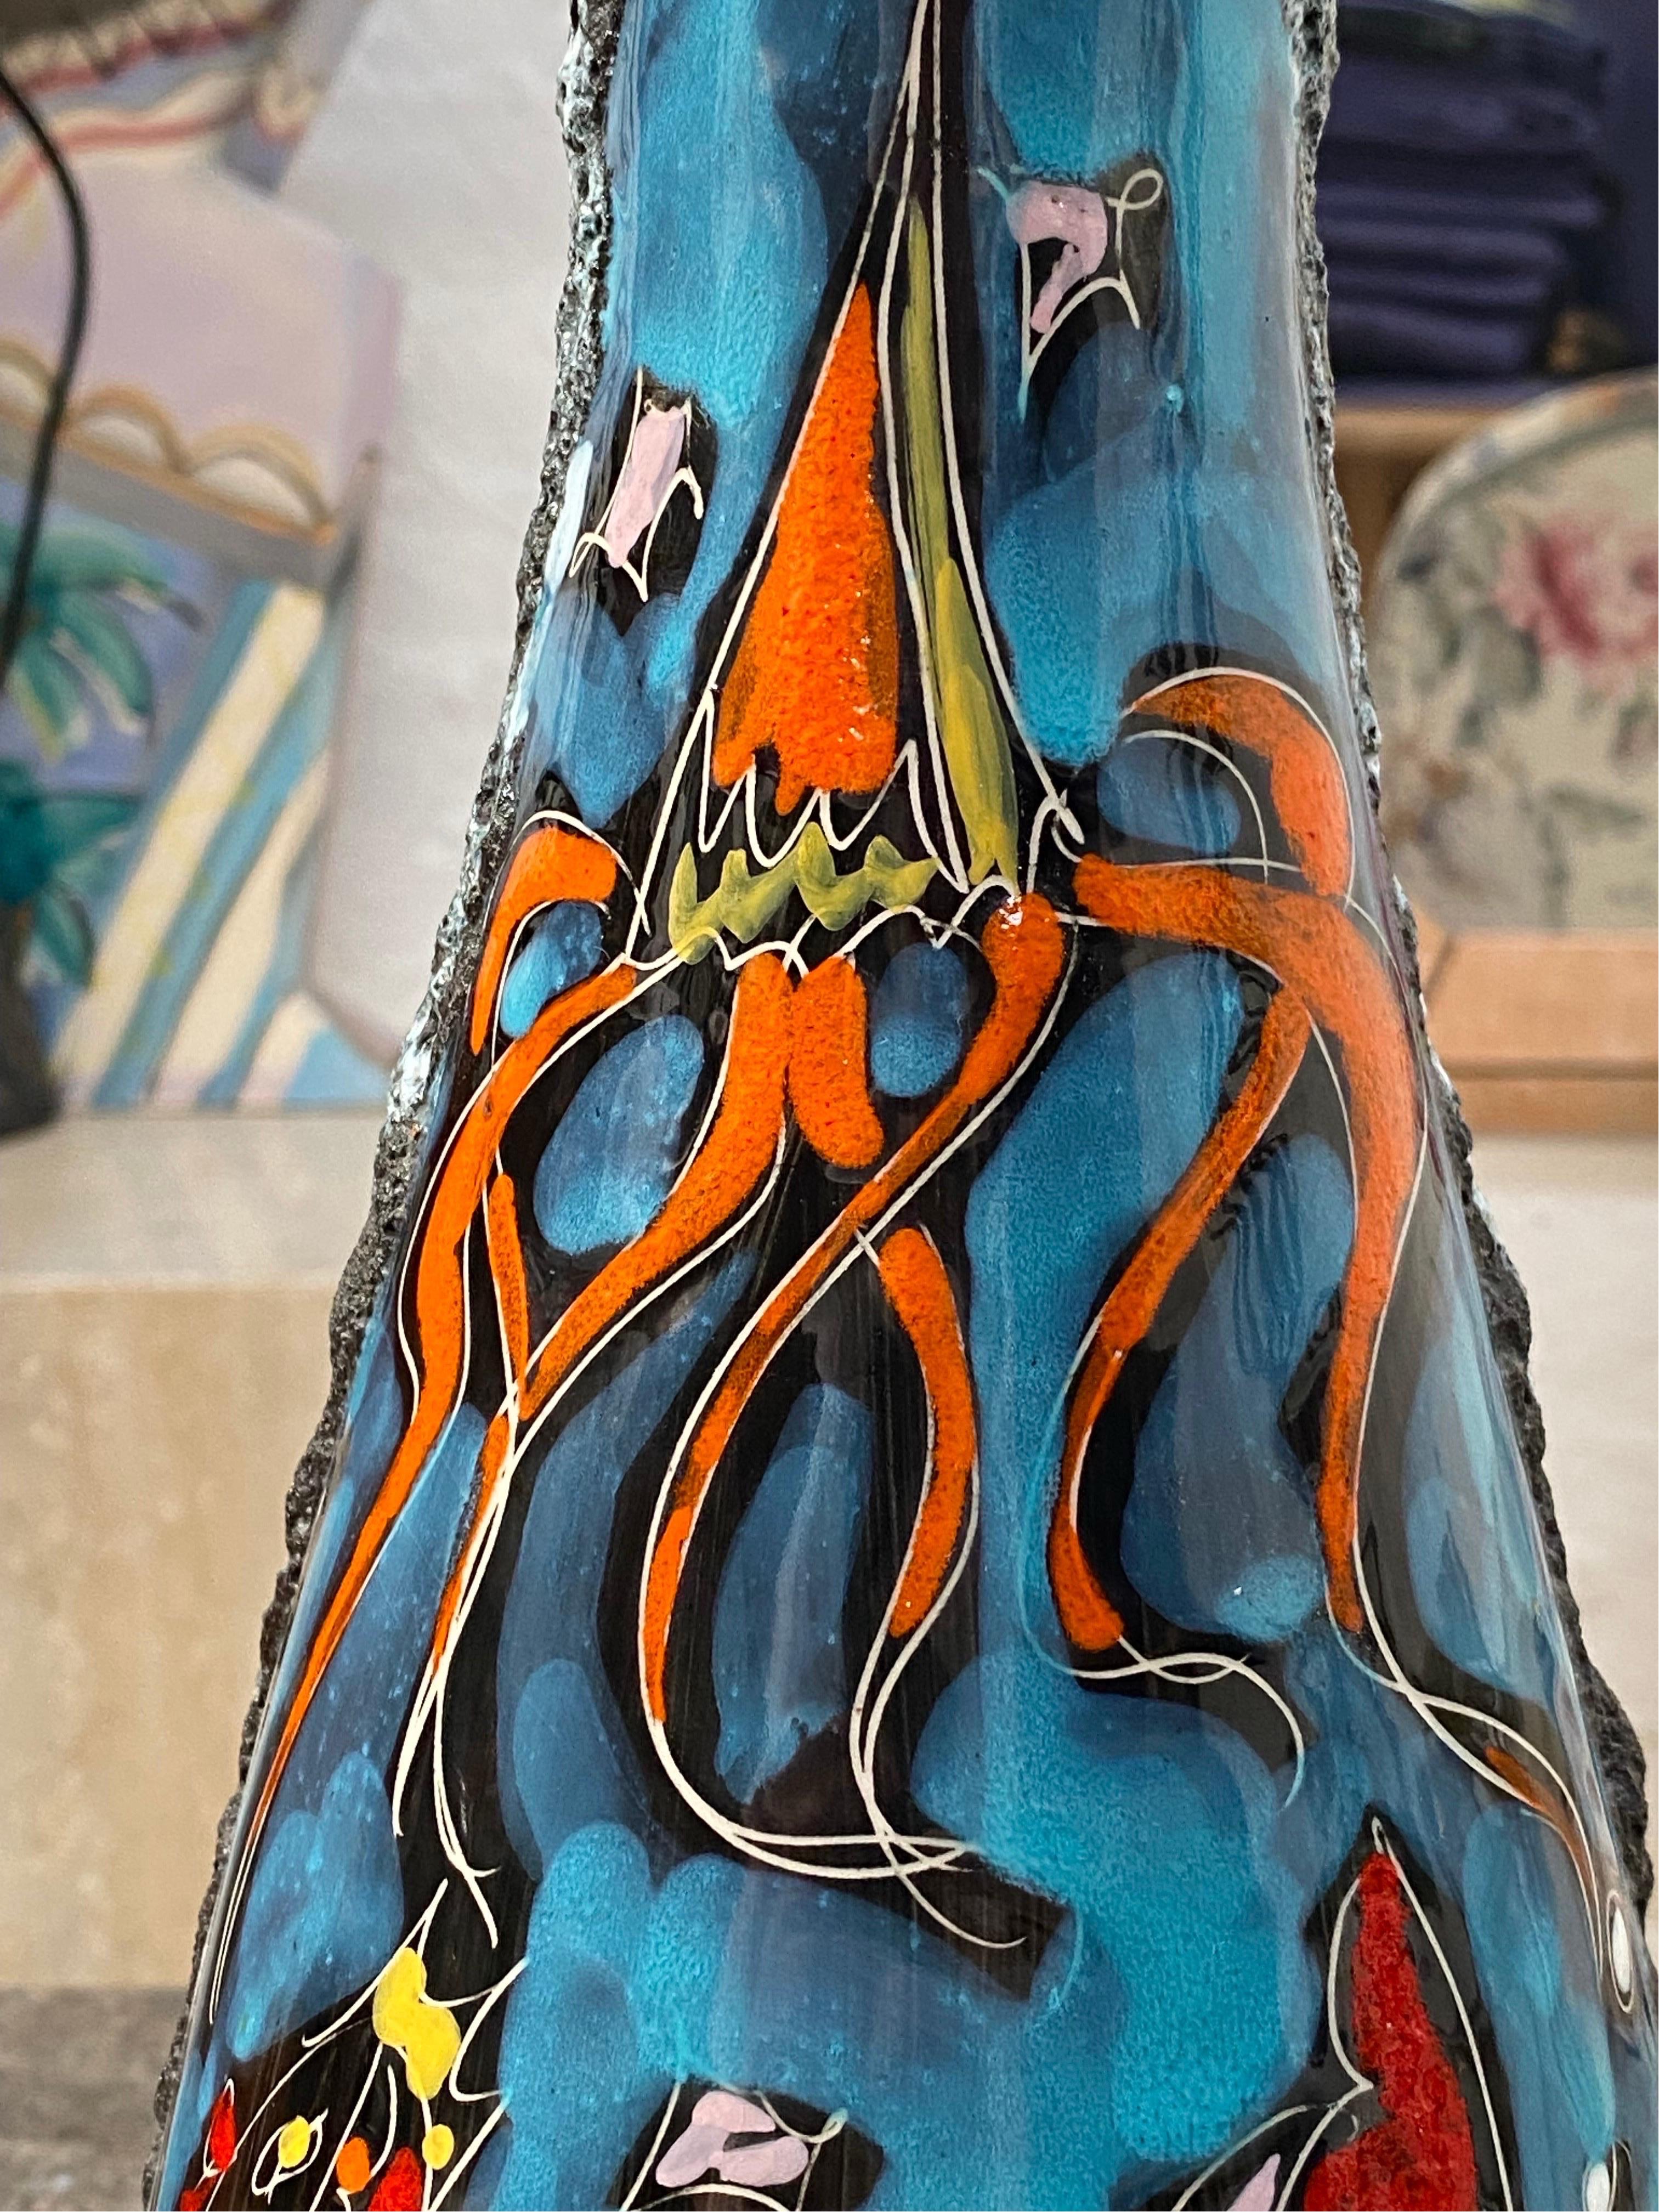 An unusually large example of San Marino tourist pottery with 'Smalto Roccia' or 'Lava' glaze. The brightly colored blue panel illustrates a Mediterranean rock pool, including a jellyfish and various colorful fish swimming about amid swaying sea